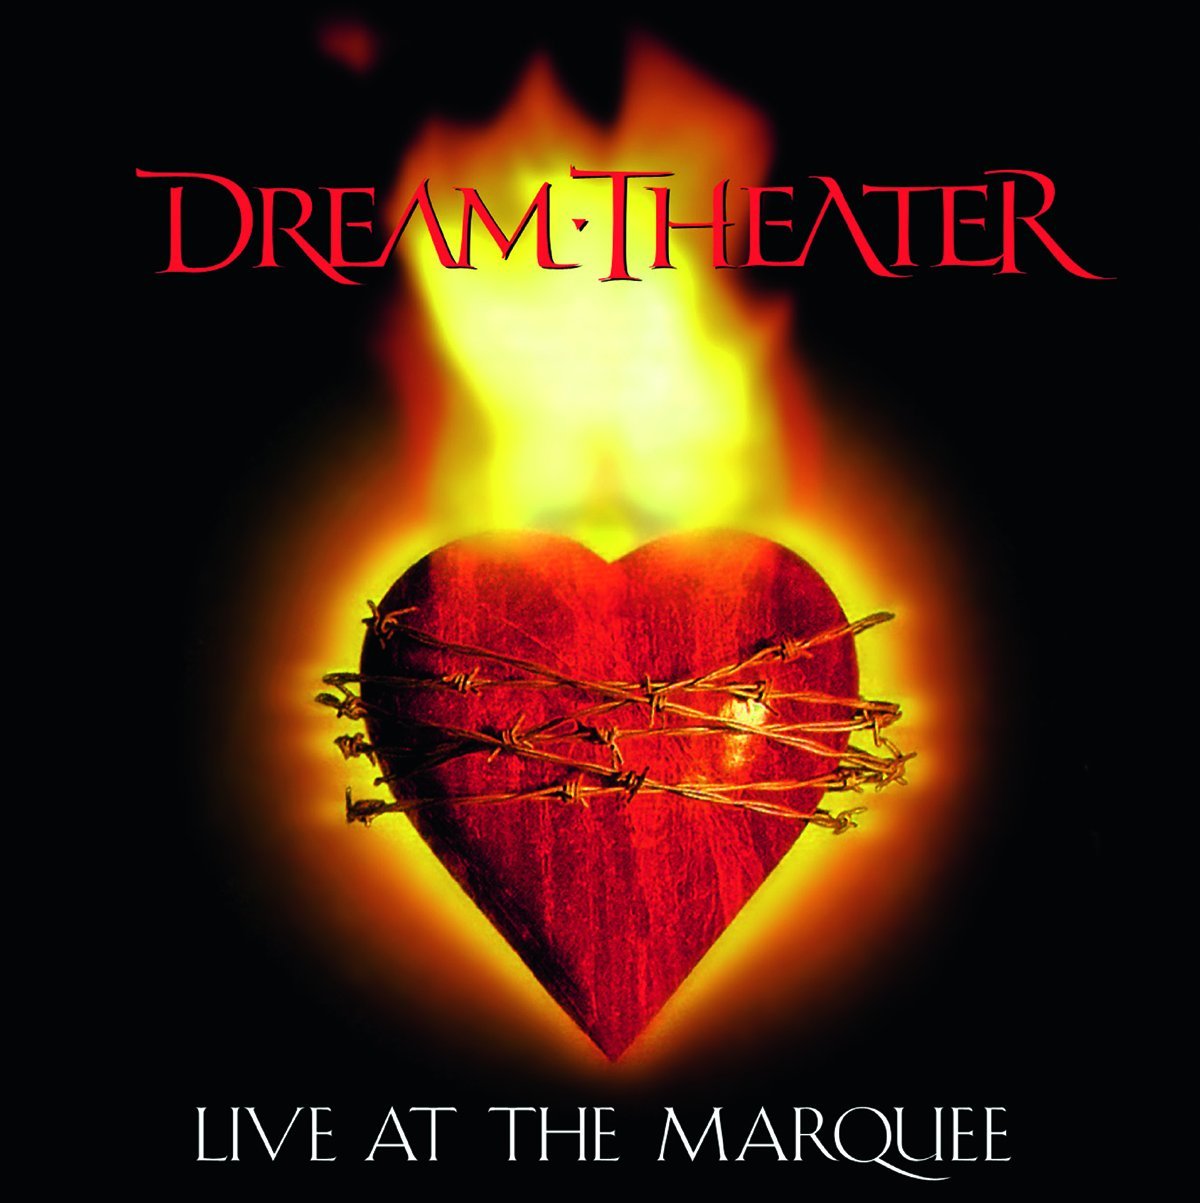 Dream-Theater-Live-at-the-Marquee-Vinile-lp2